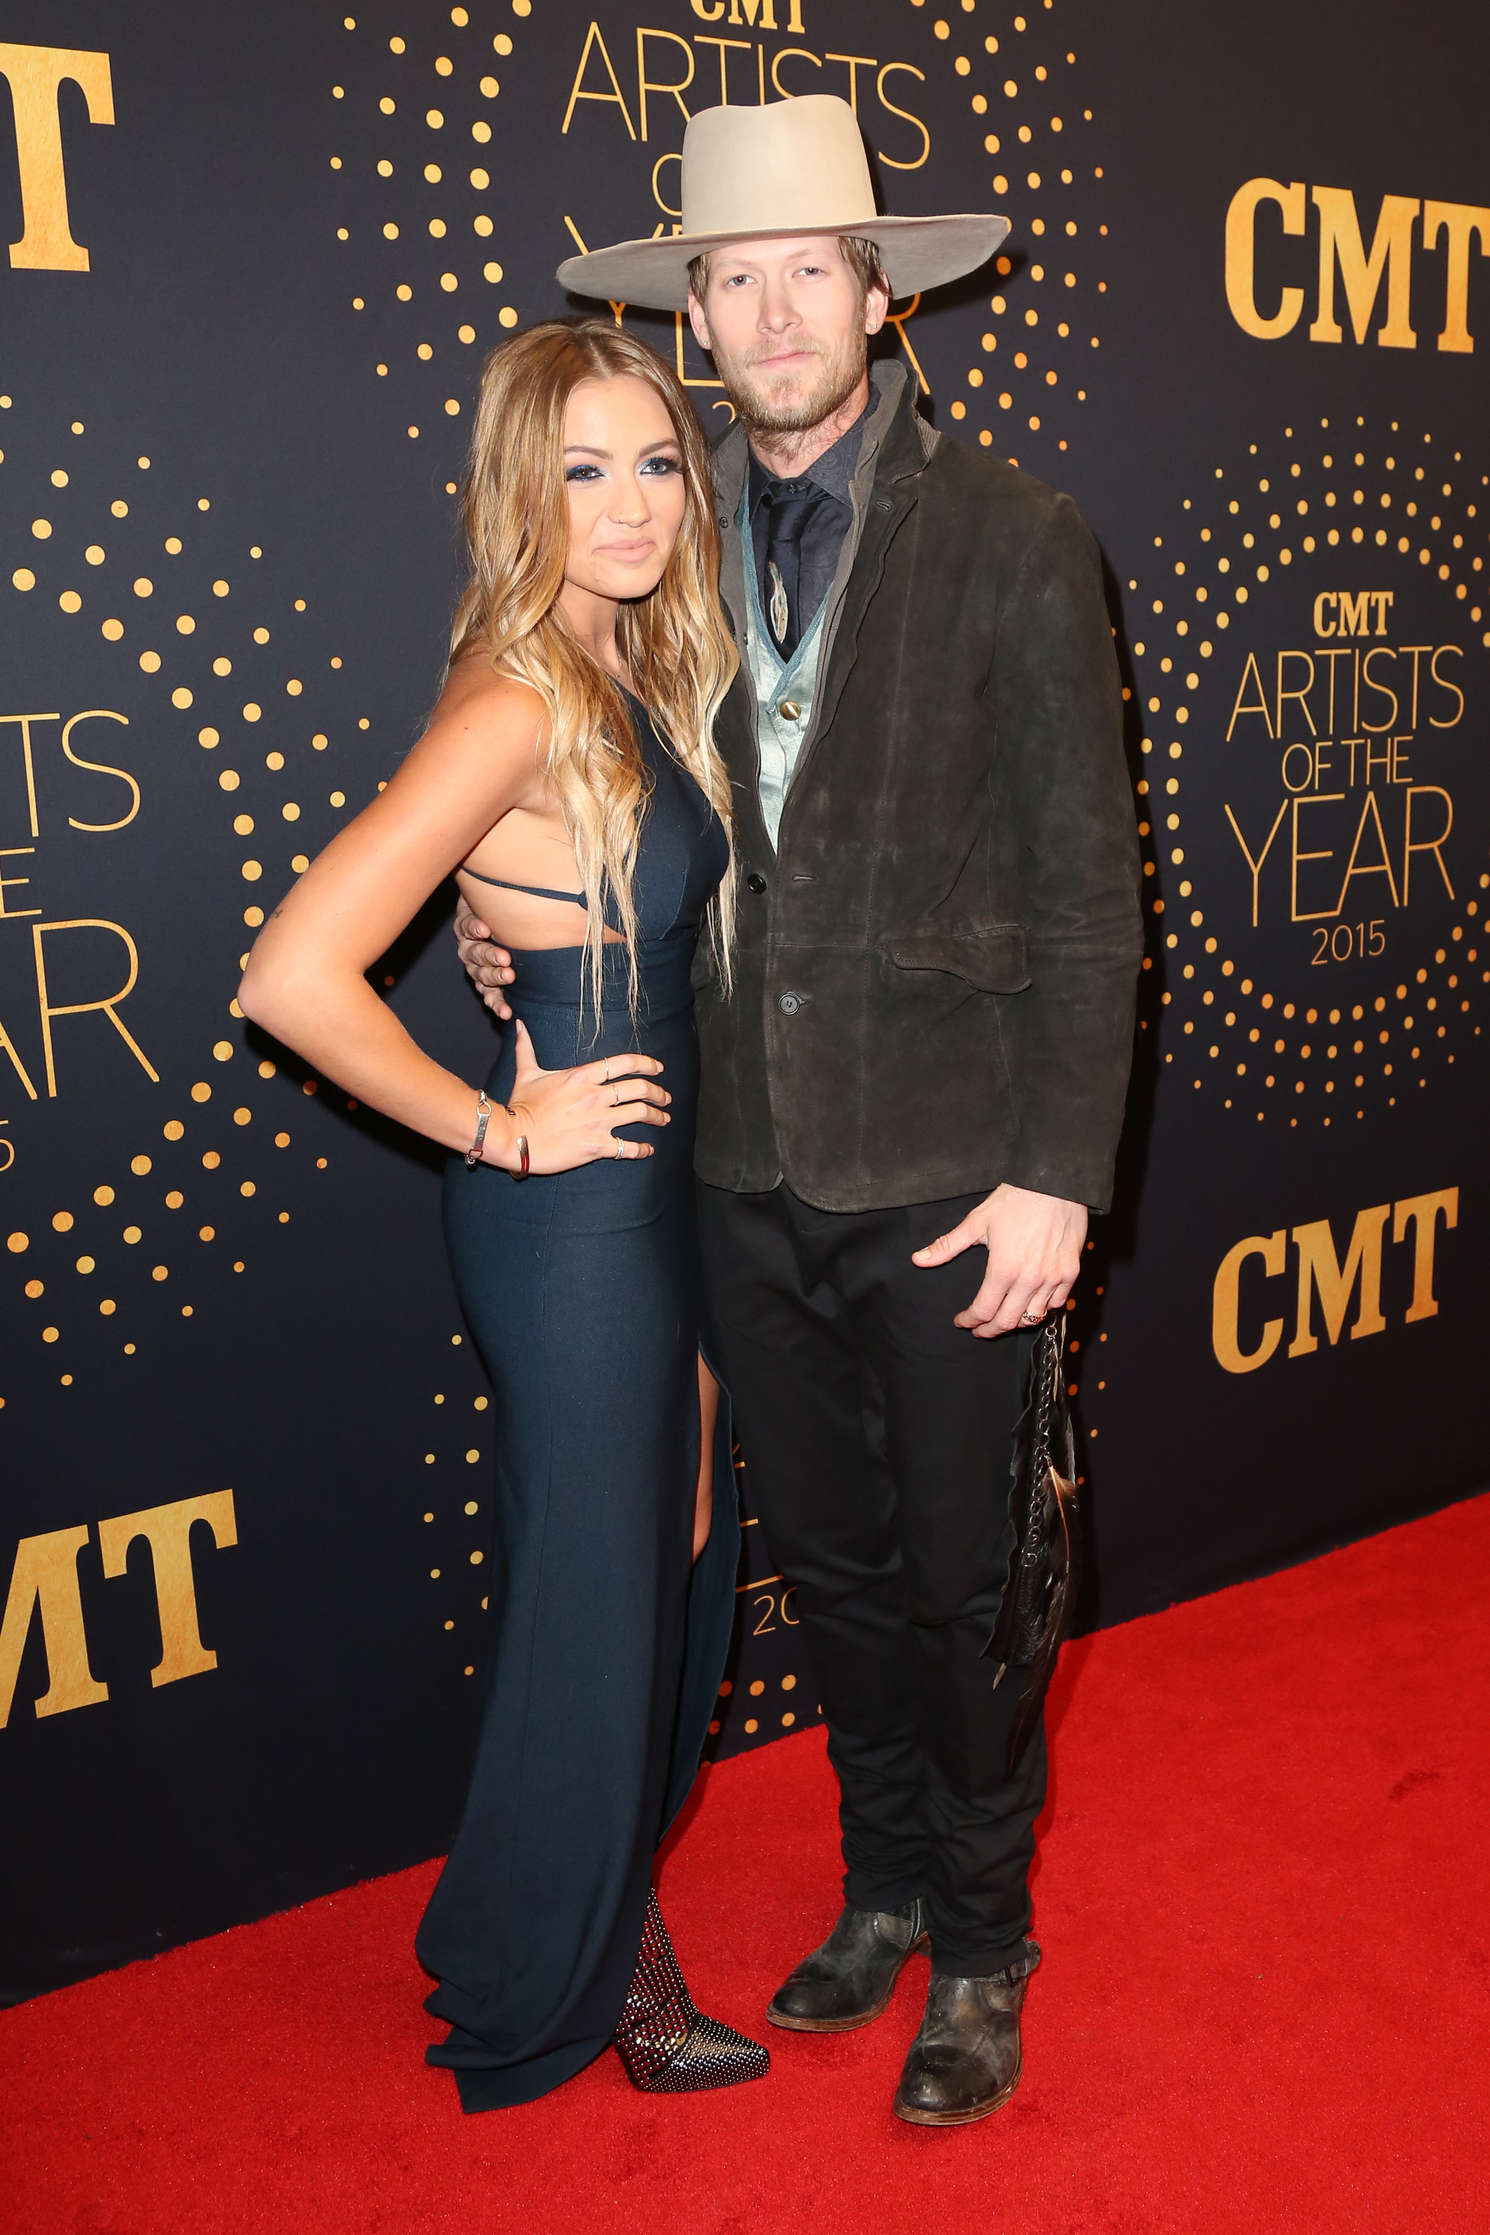 Brittney Marie Cole CMT Artists of the Year in Nashville-1